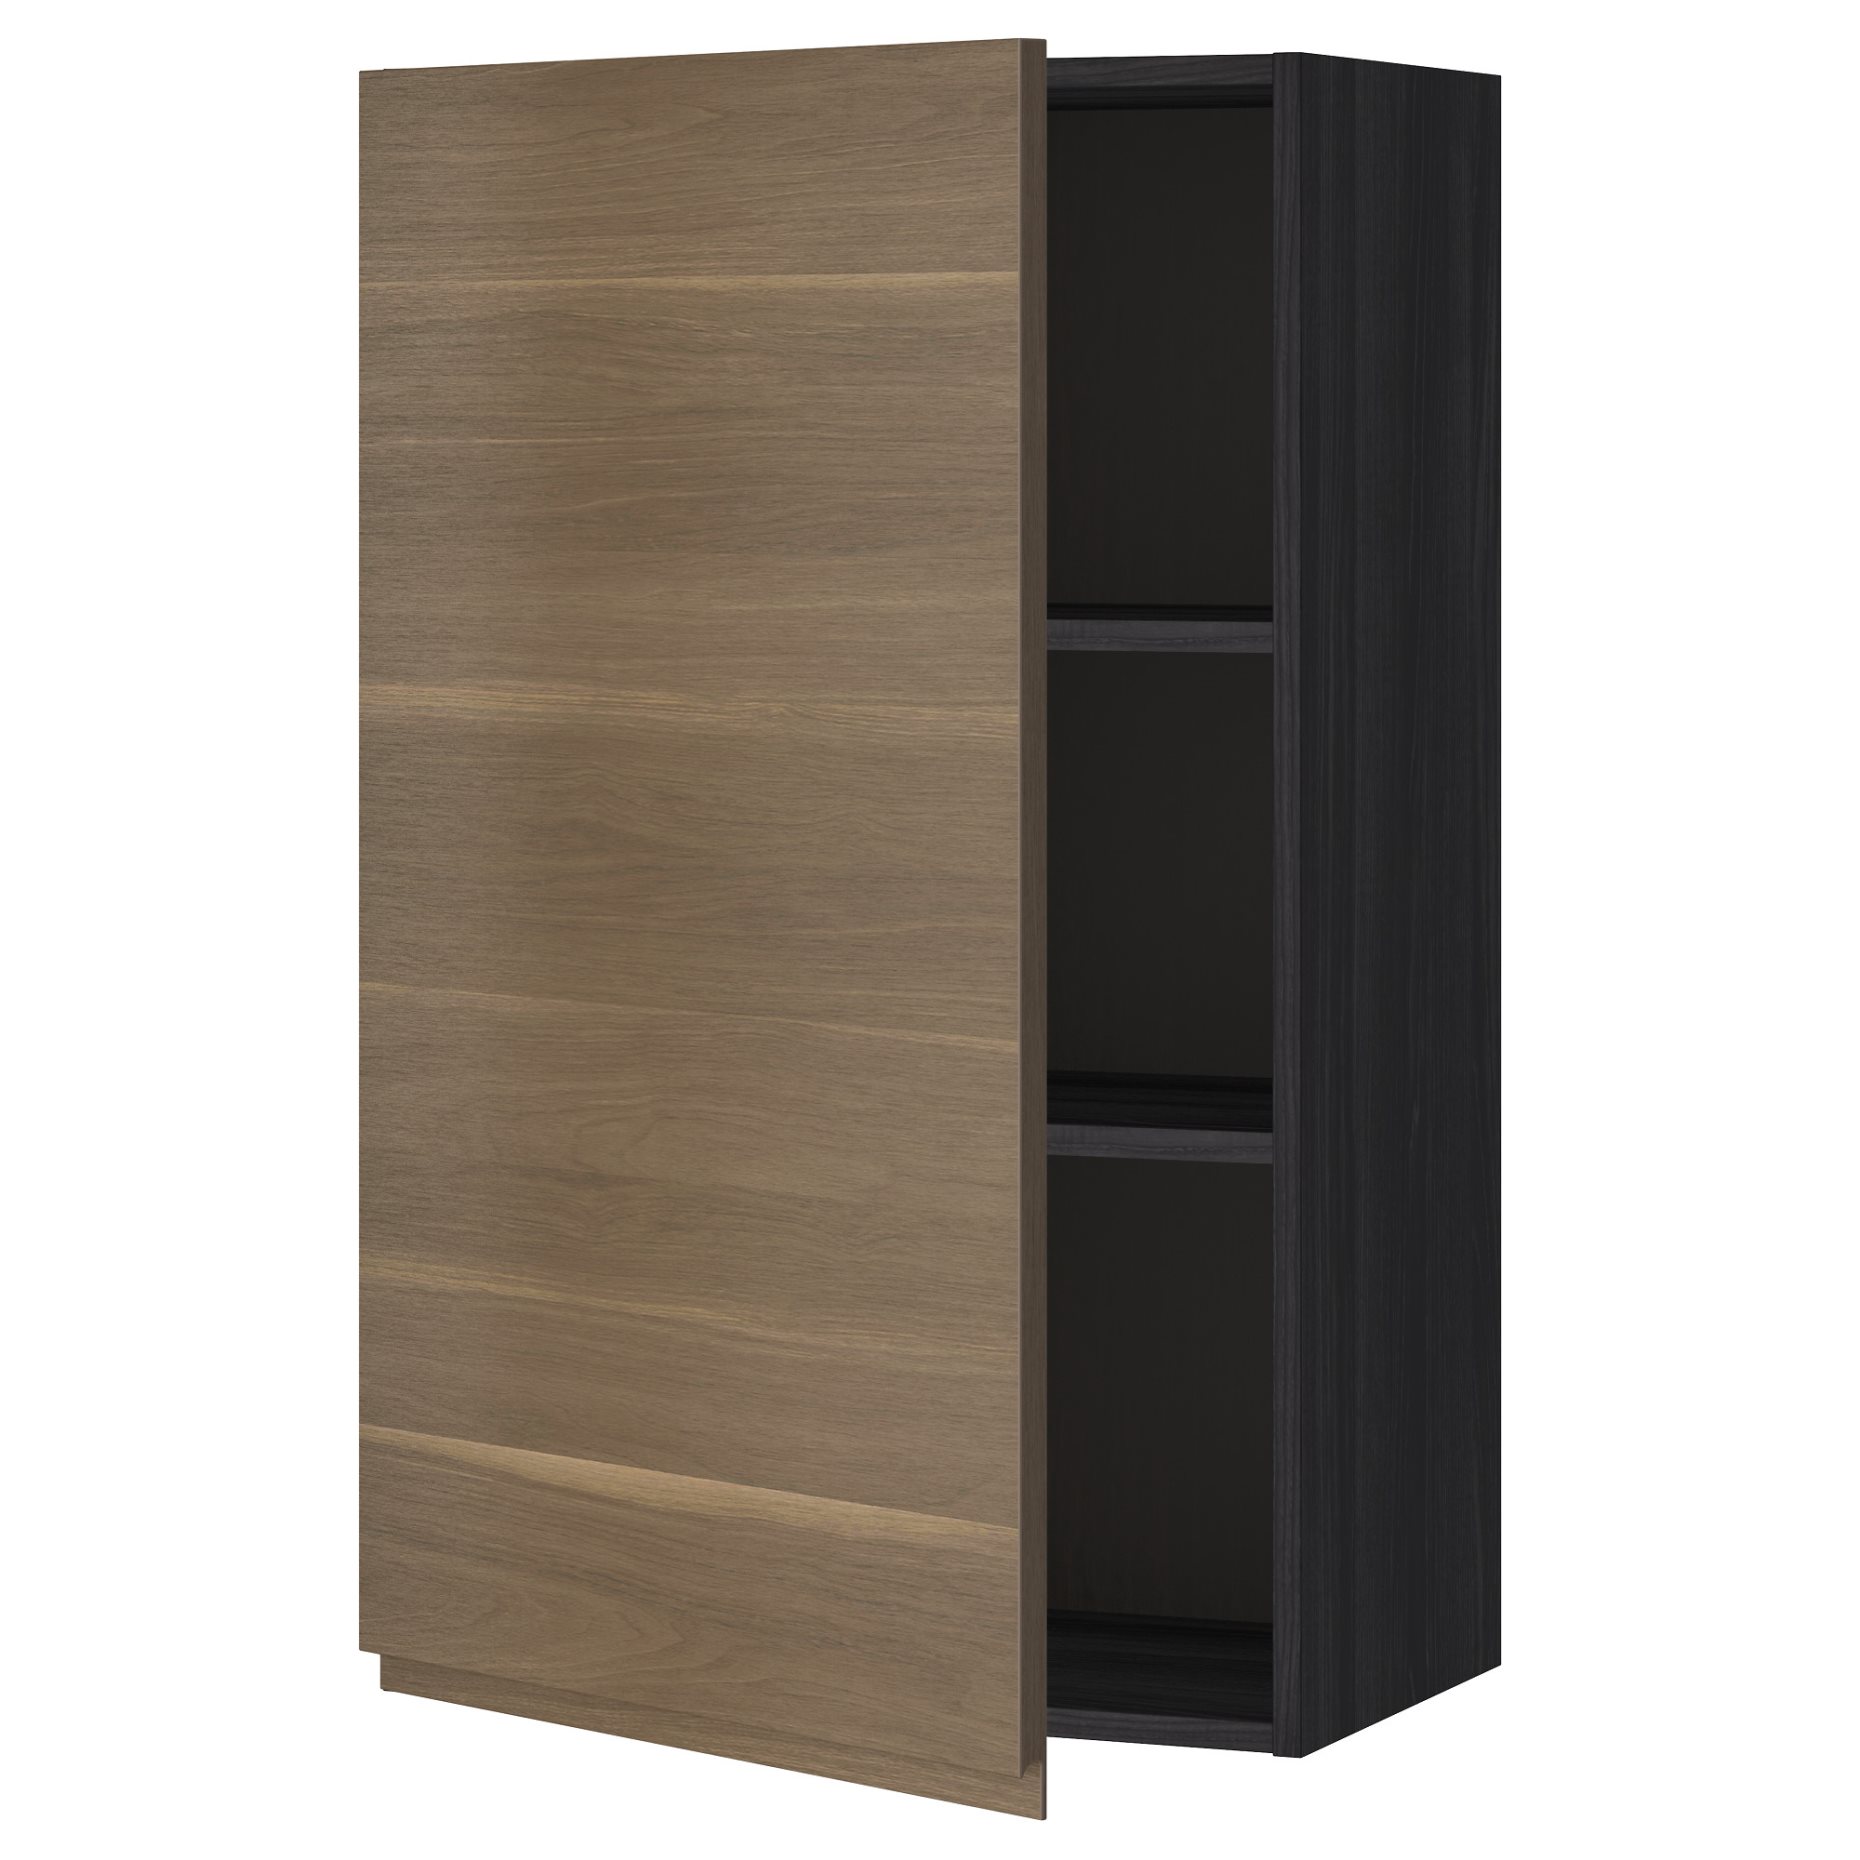 METOD, wall cabinet with shelves, 60x100 cm, 994.591.60